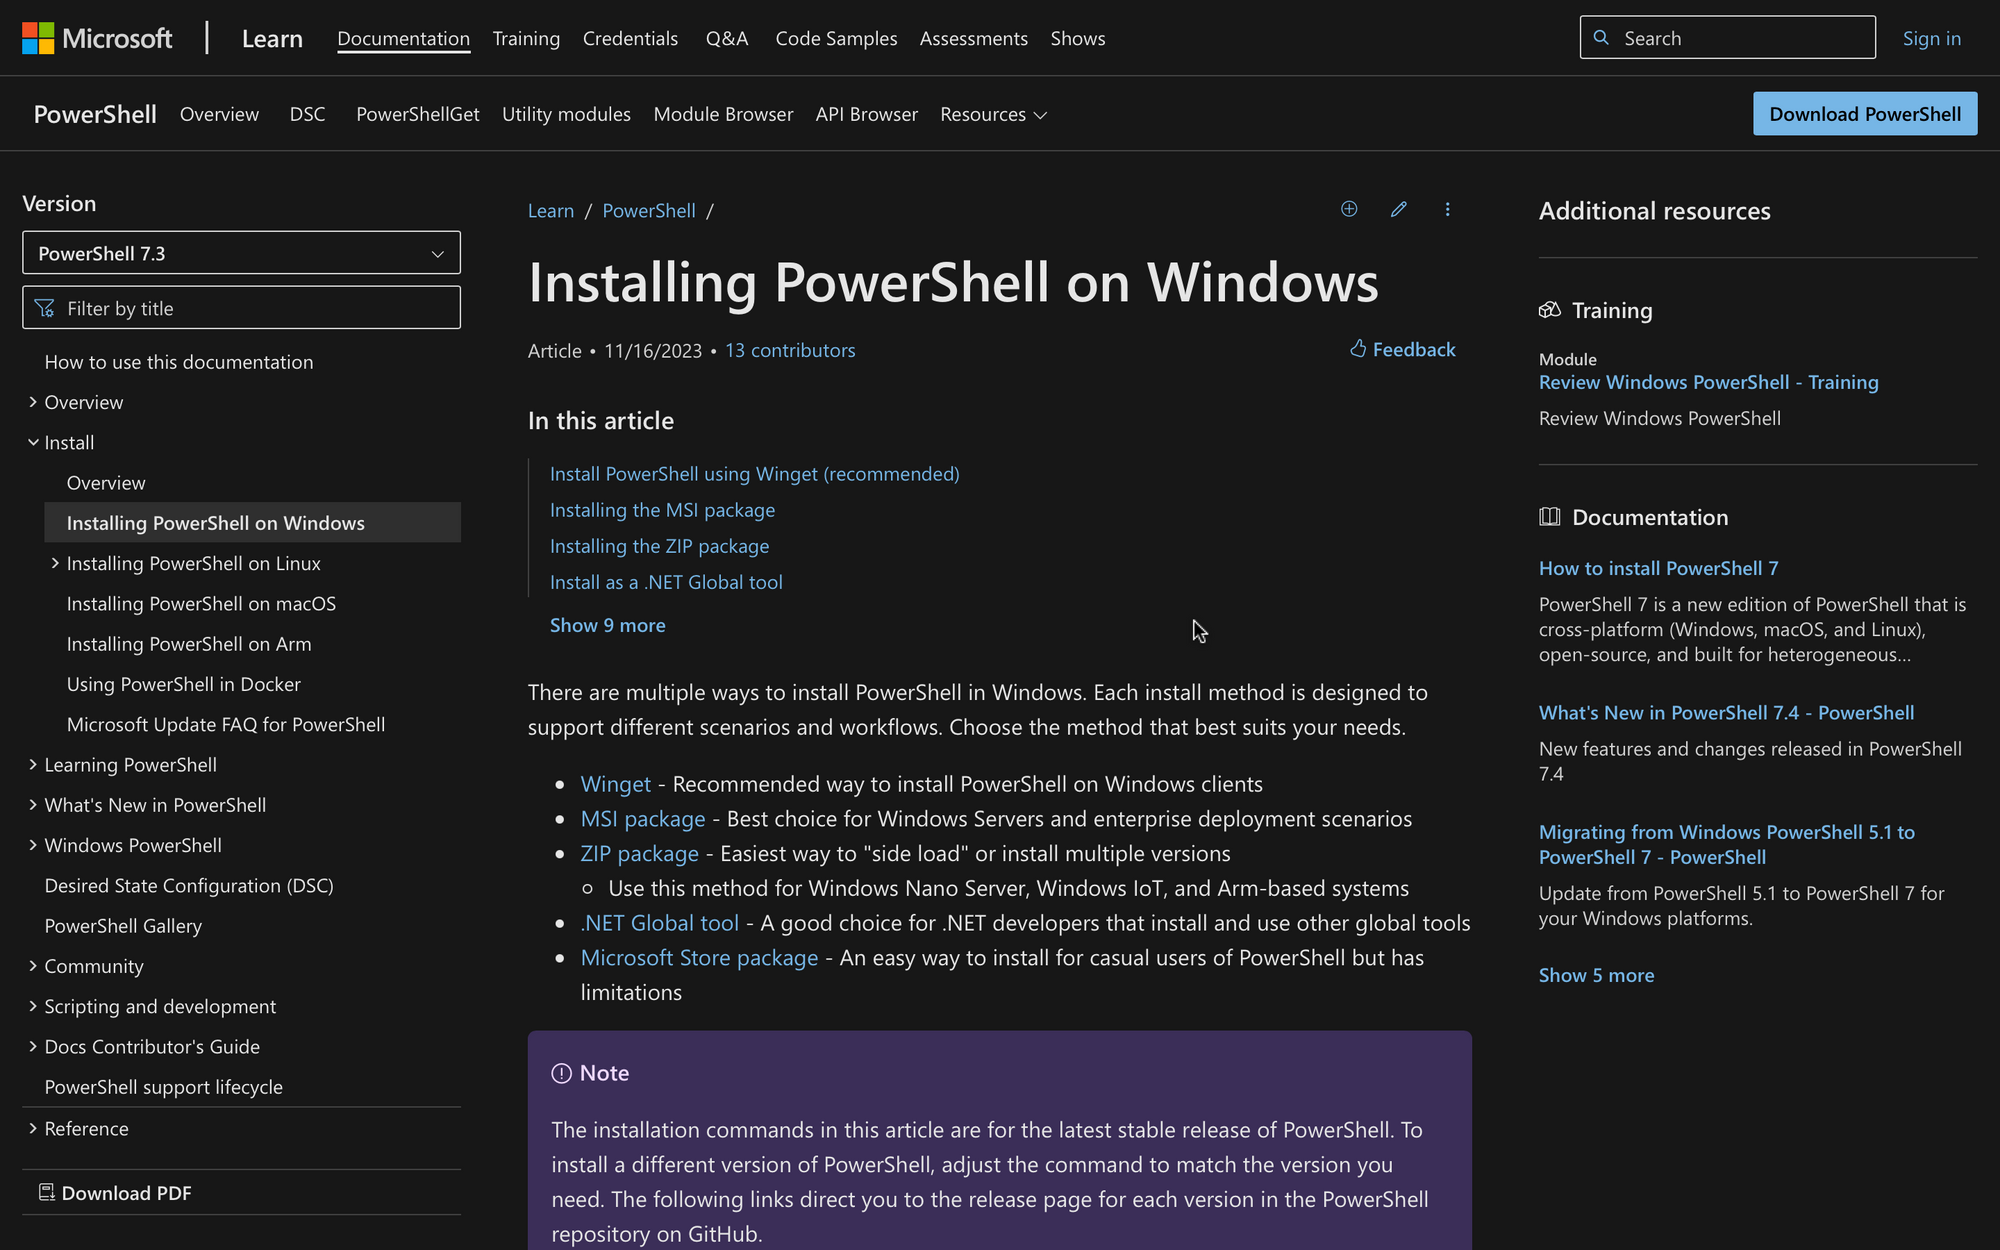 How to Install Exchange Online PowerShell Module